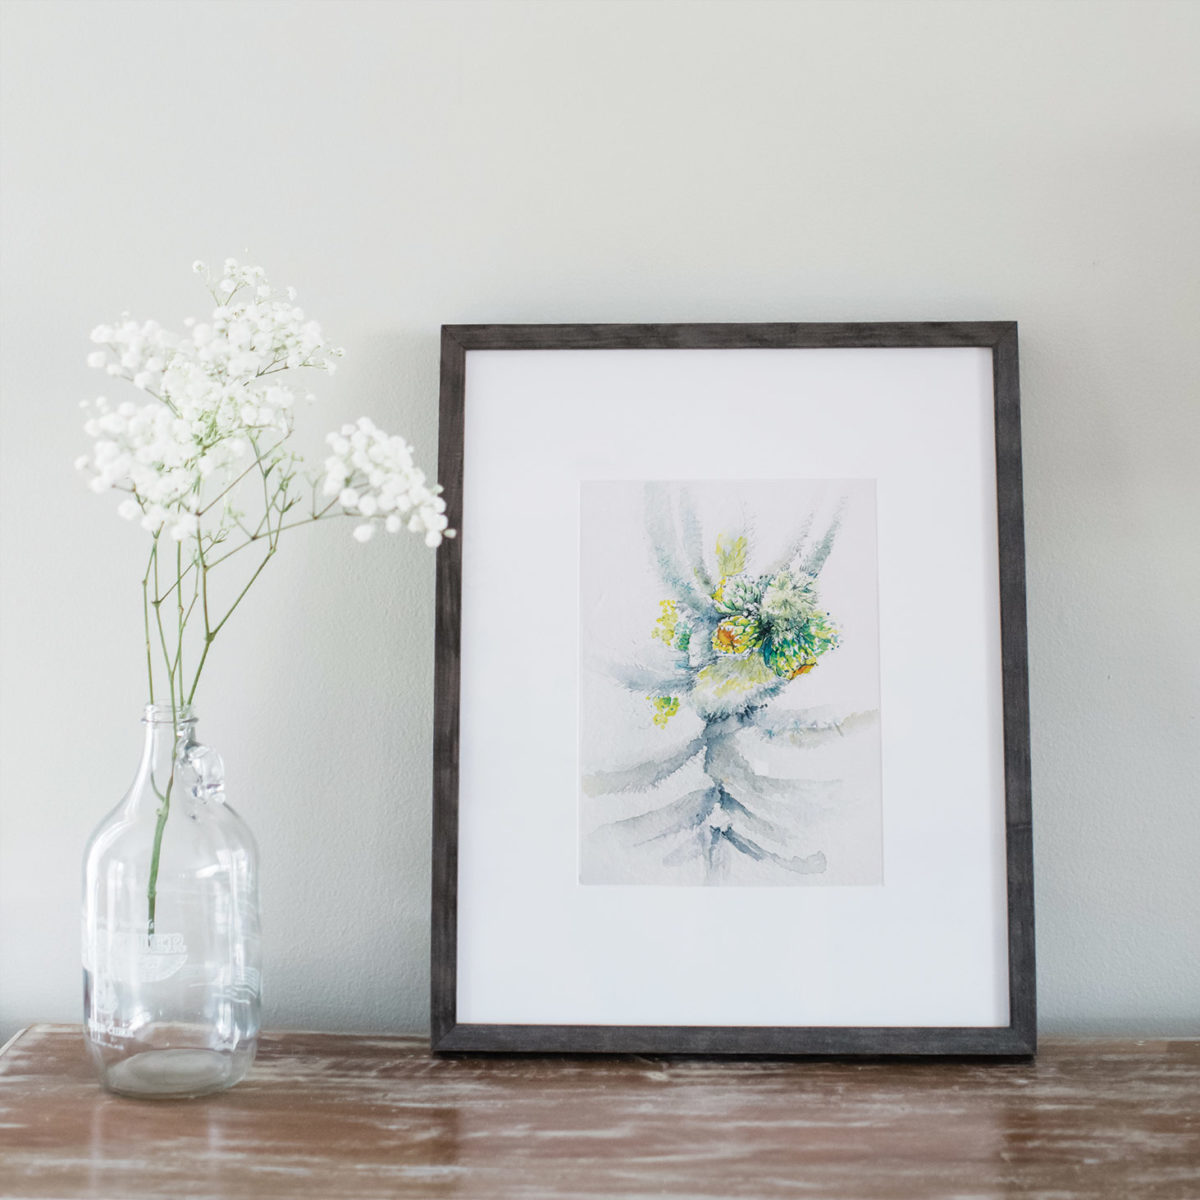 Watercolor of cactus framed next to flowers